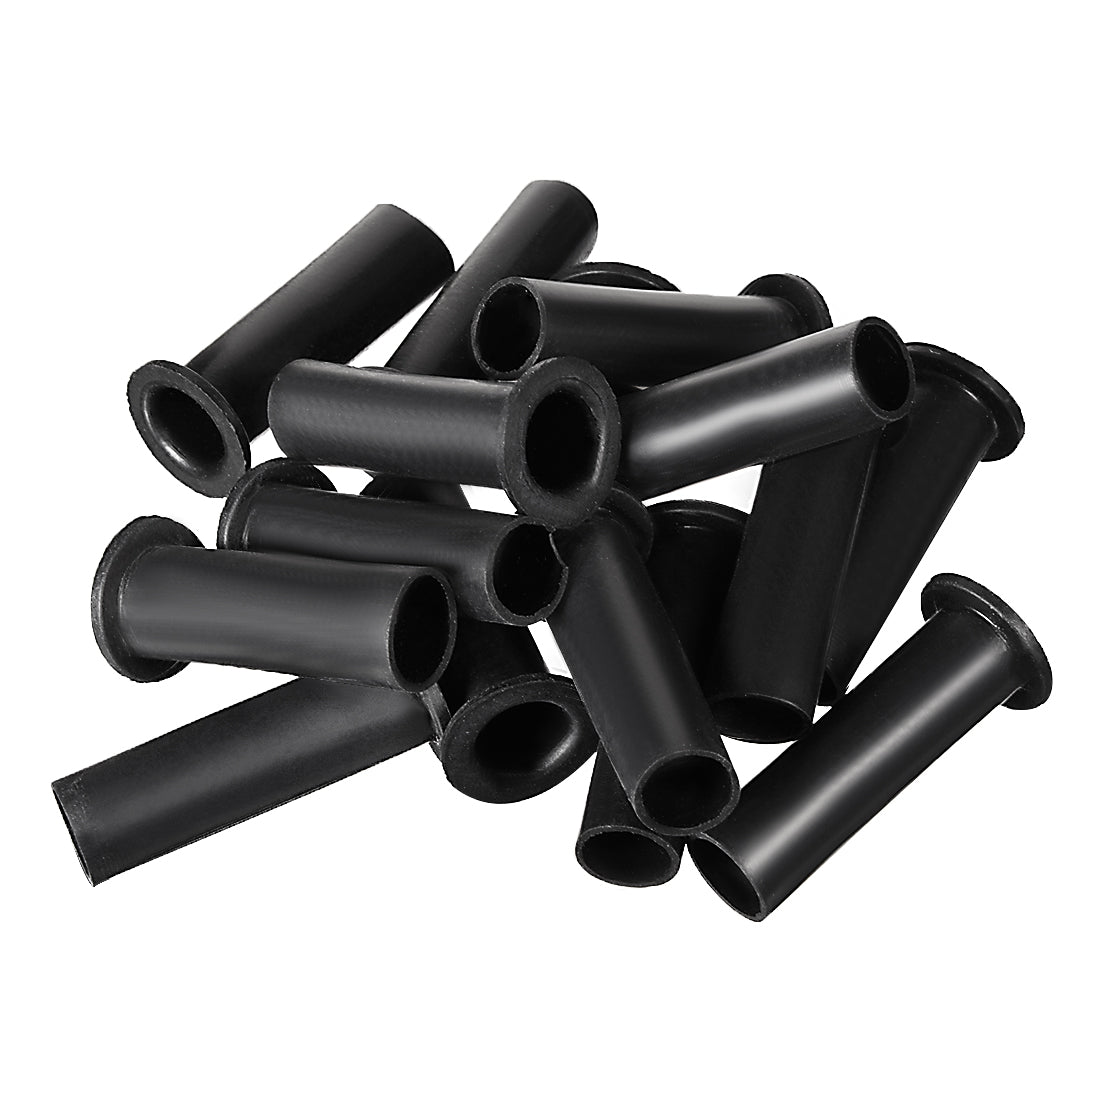 uxcell Uxcell 15 Pcs PVC Strain Relief Cord Boot Protector Cable Sleeve Hose 54mm Long Black